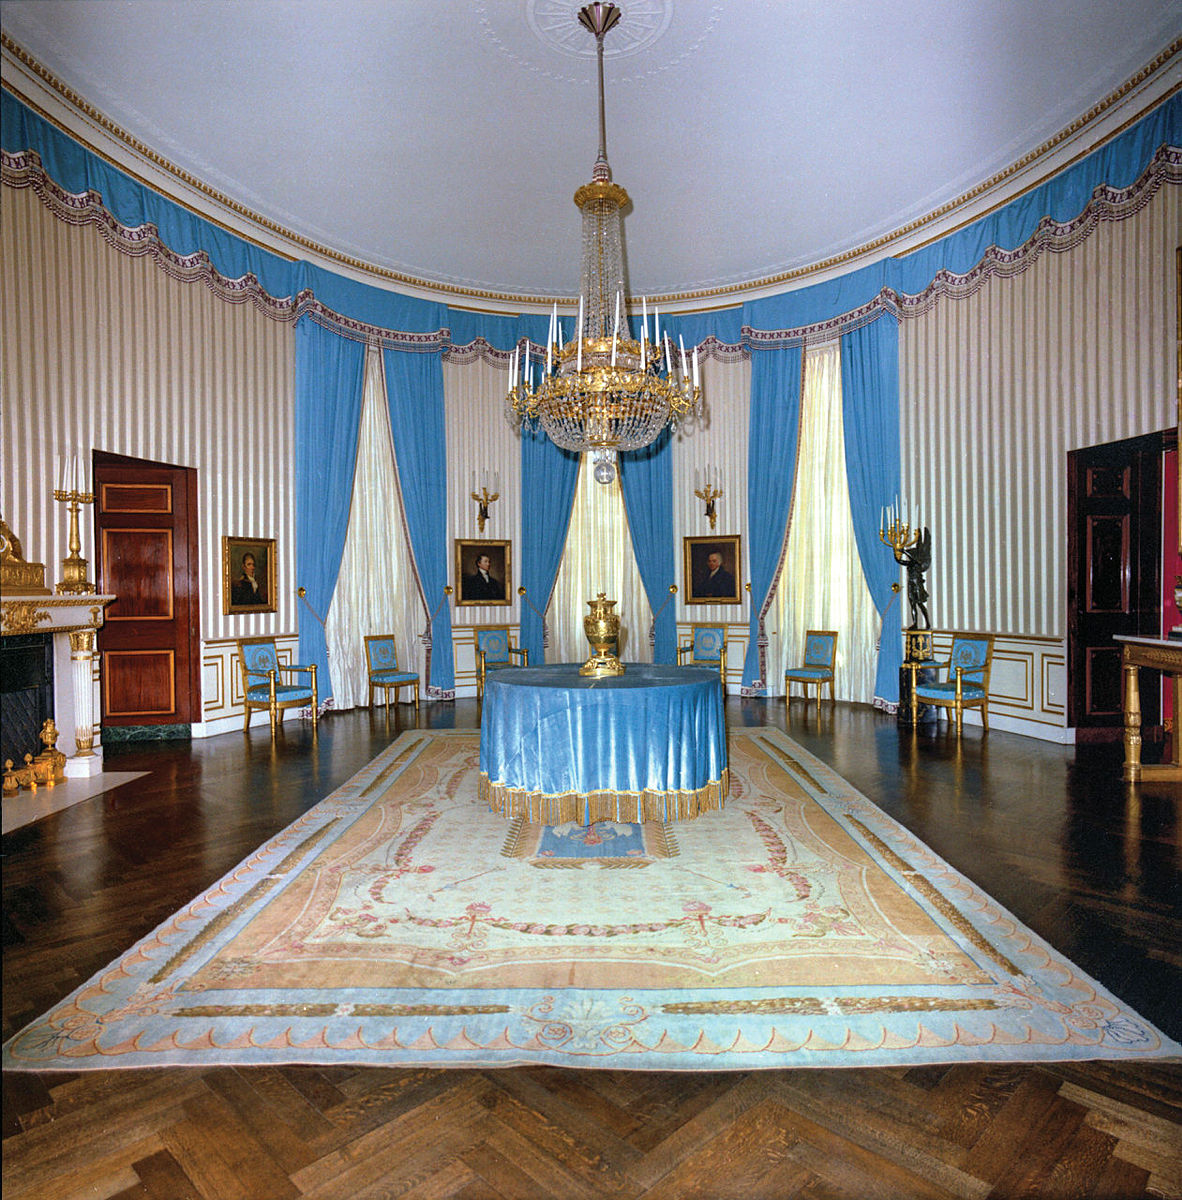 Happy Thursday! Check out these photos of the White House Blue Room before and after First Lady Jacqueline Kennedy’s restoration. 📷: @JFKLibrary